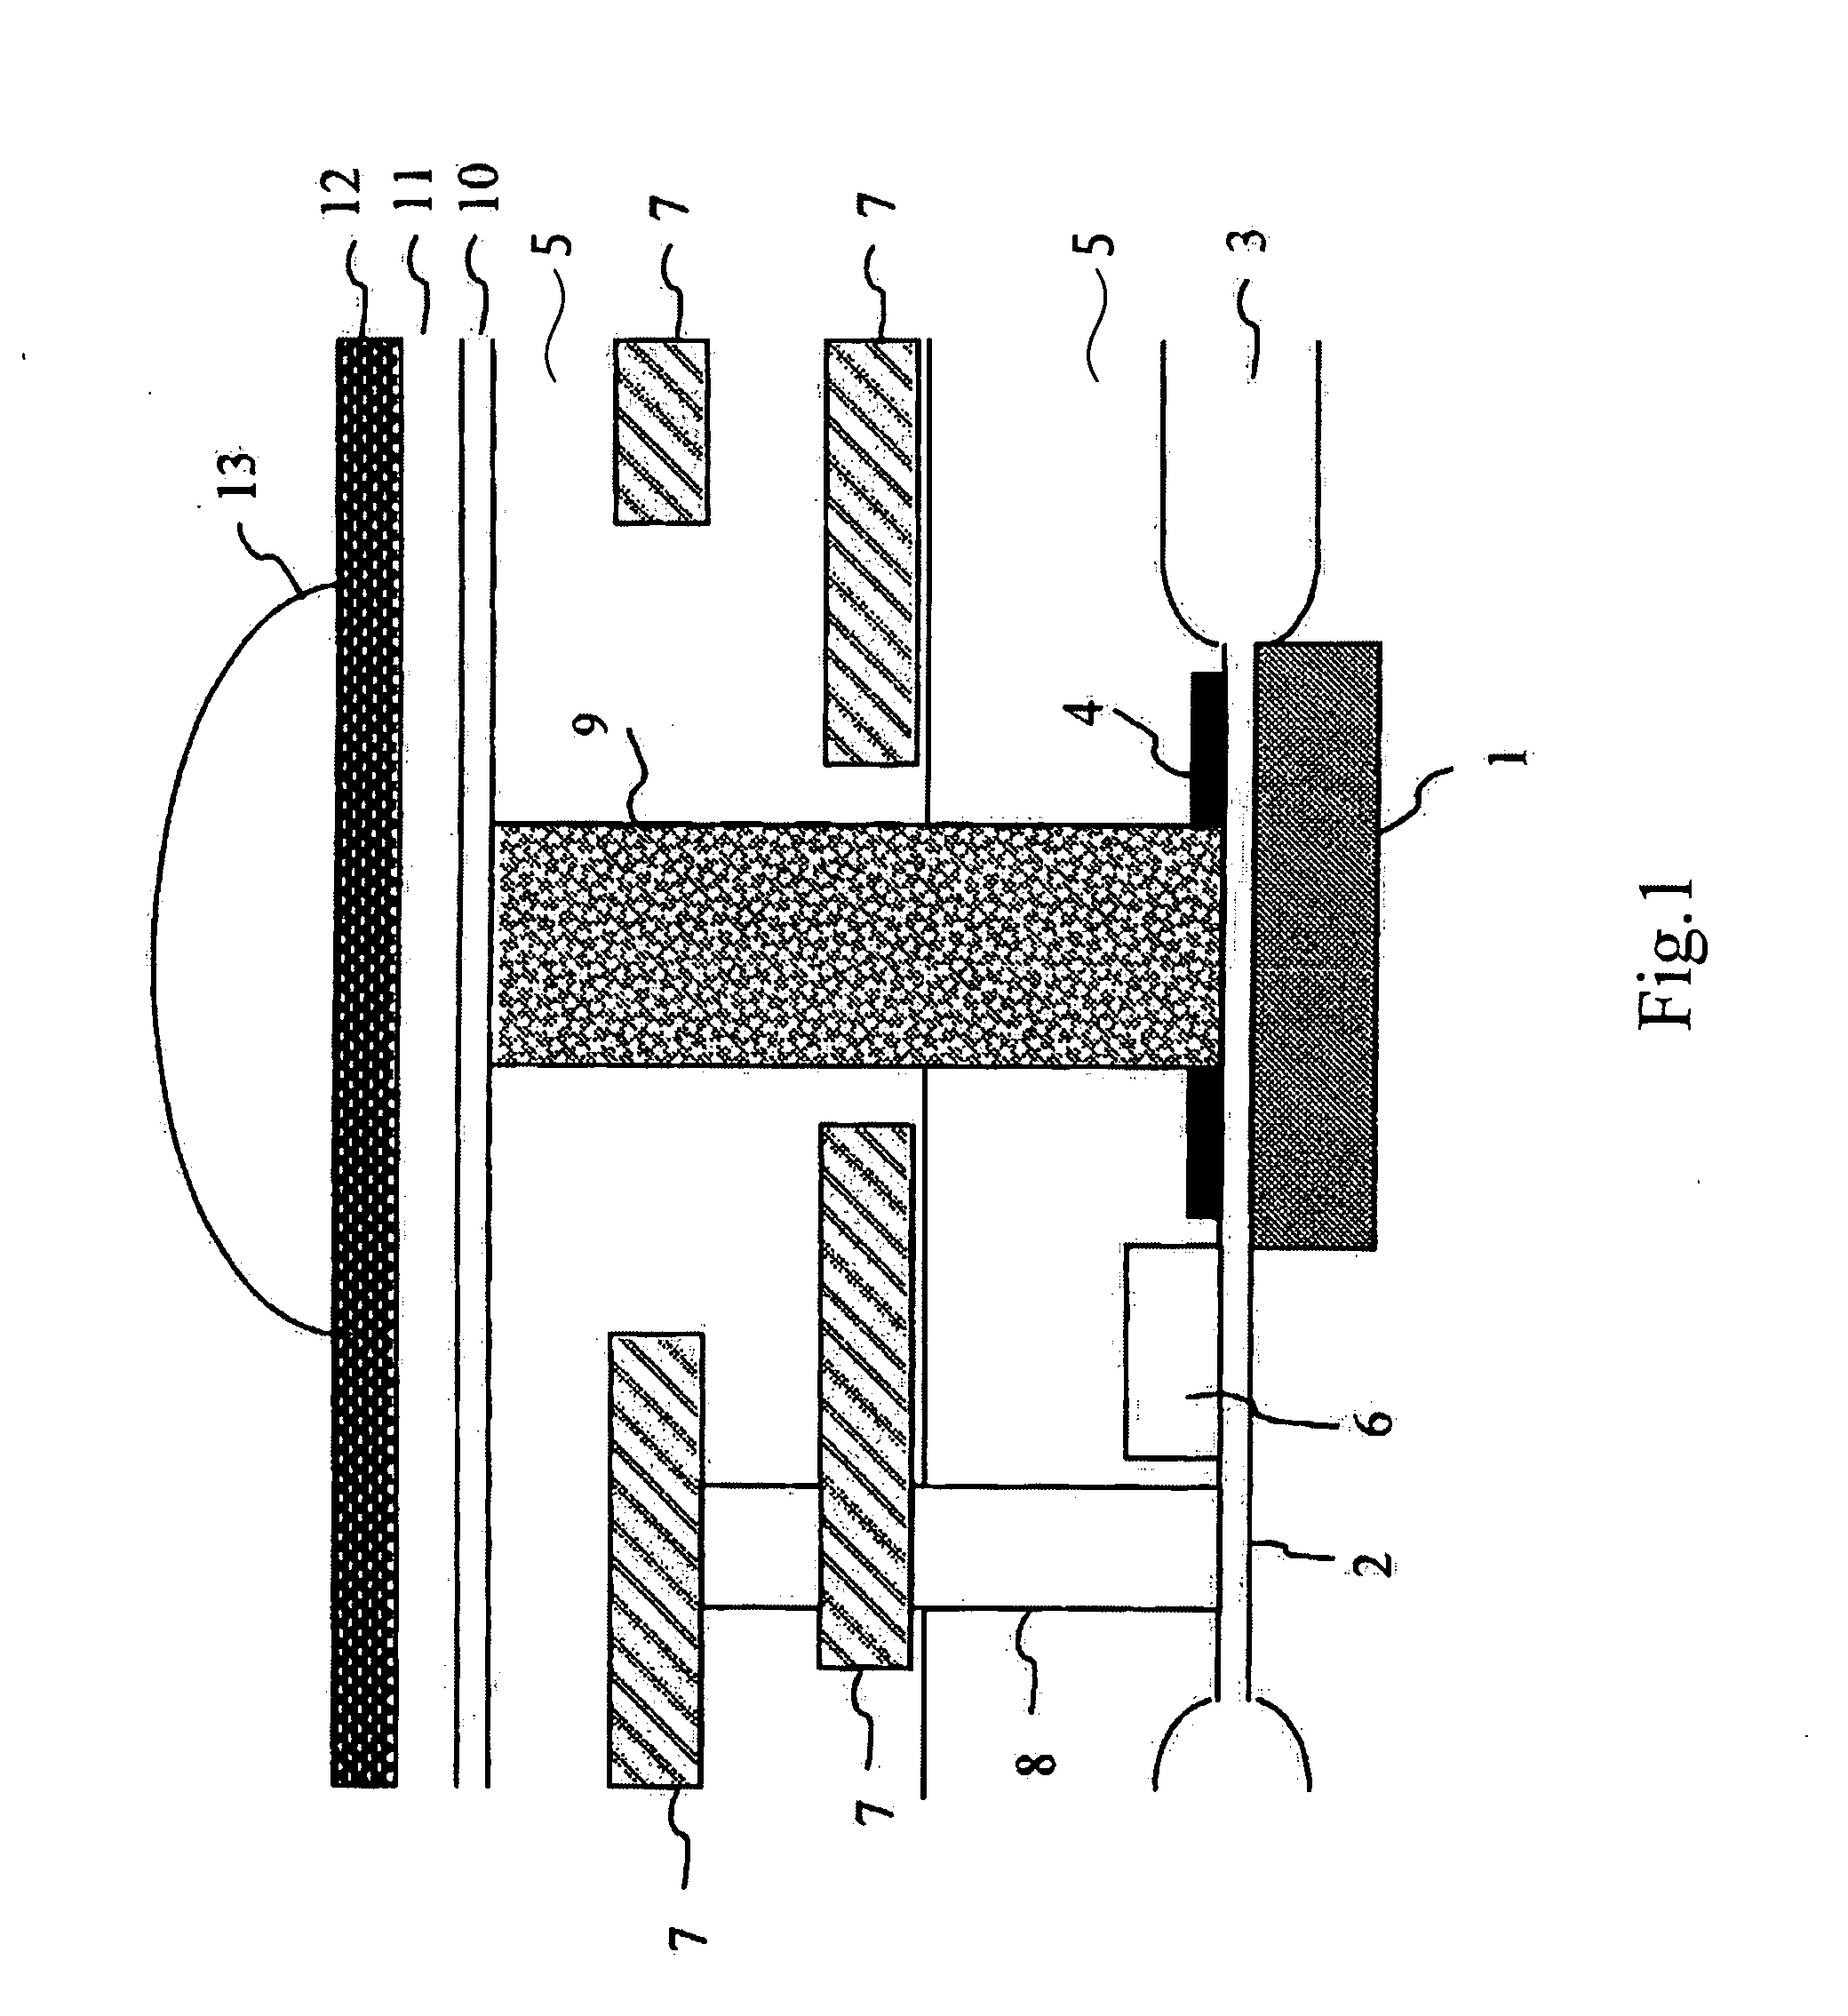 Solid-state imaging device and production method therefor